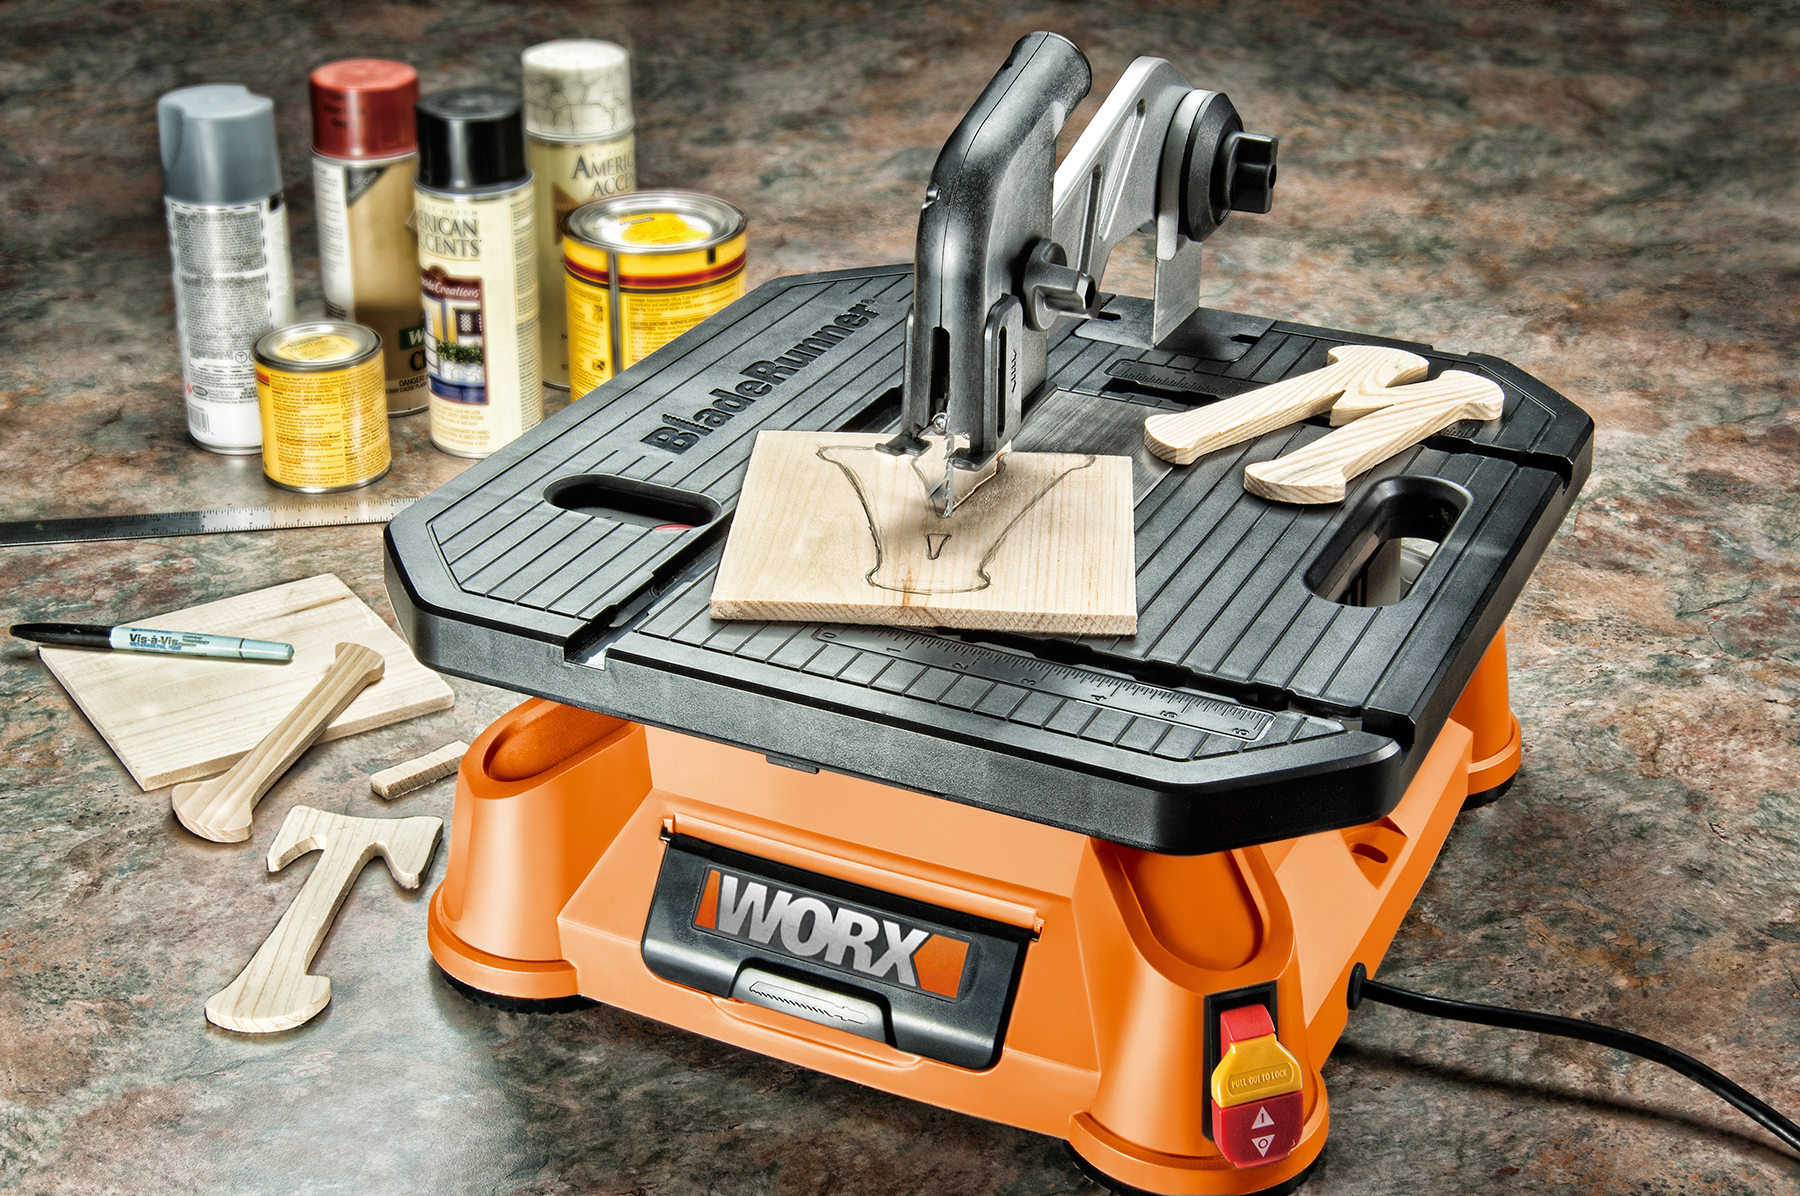 WORX BladeRunner uses assorted, T-shank, jigsaw blades to cut wood, PVC, plastic, aluminum and other non-ferrous metals, as well as ceramic tile.